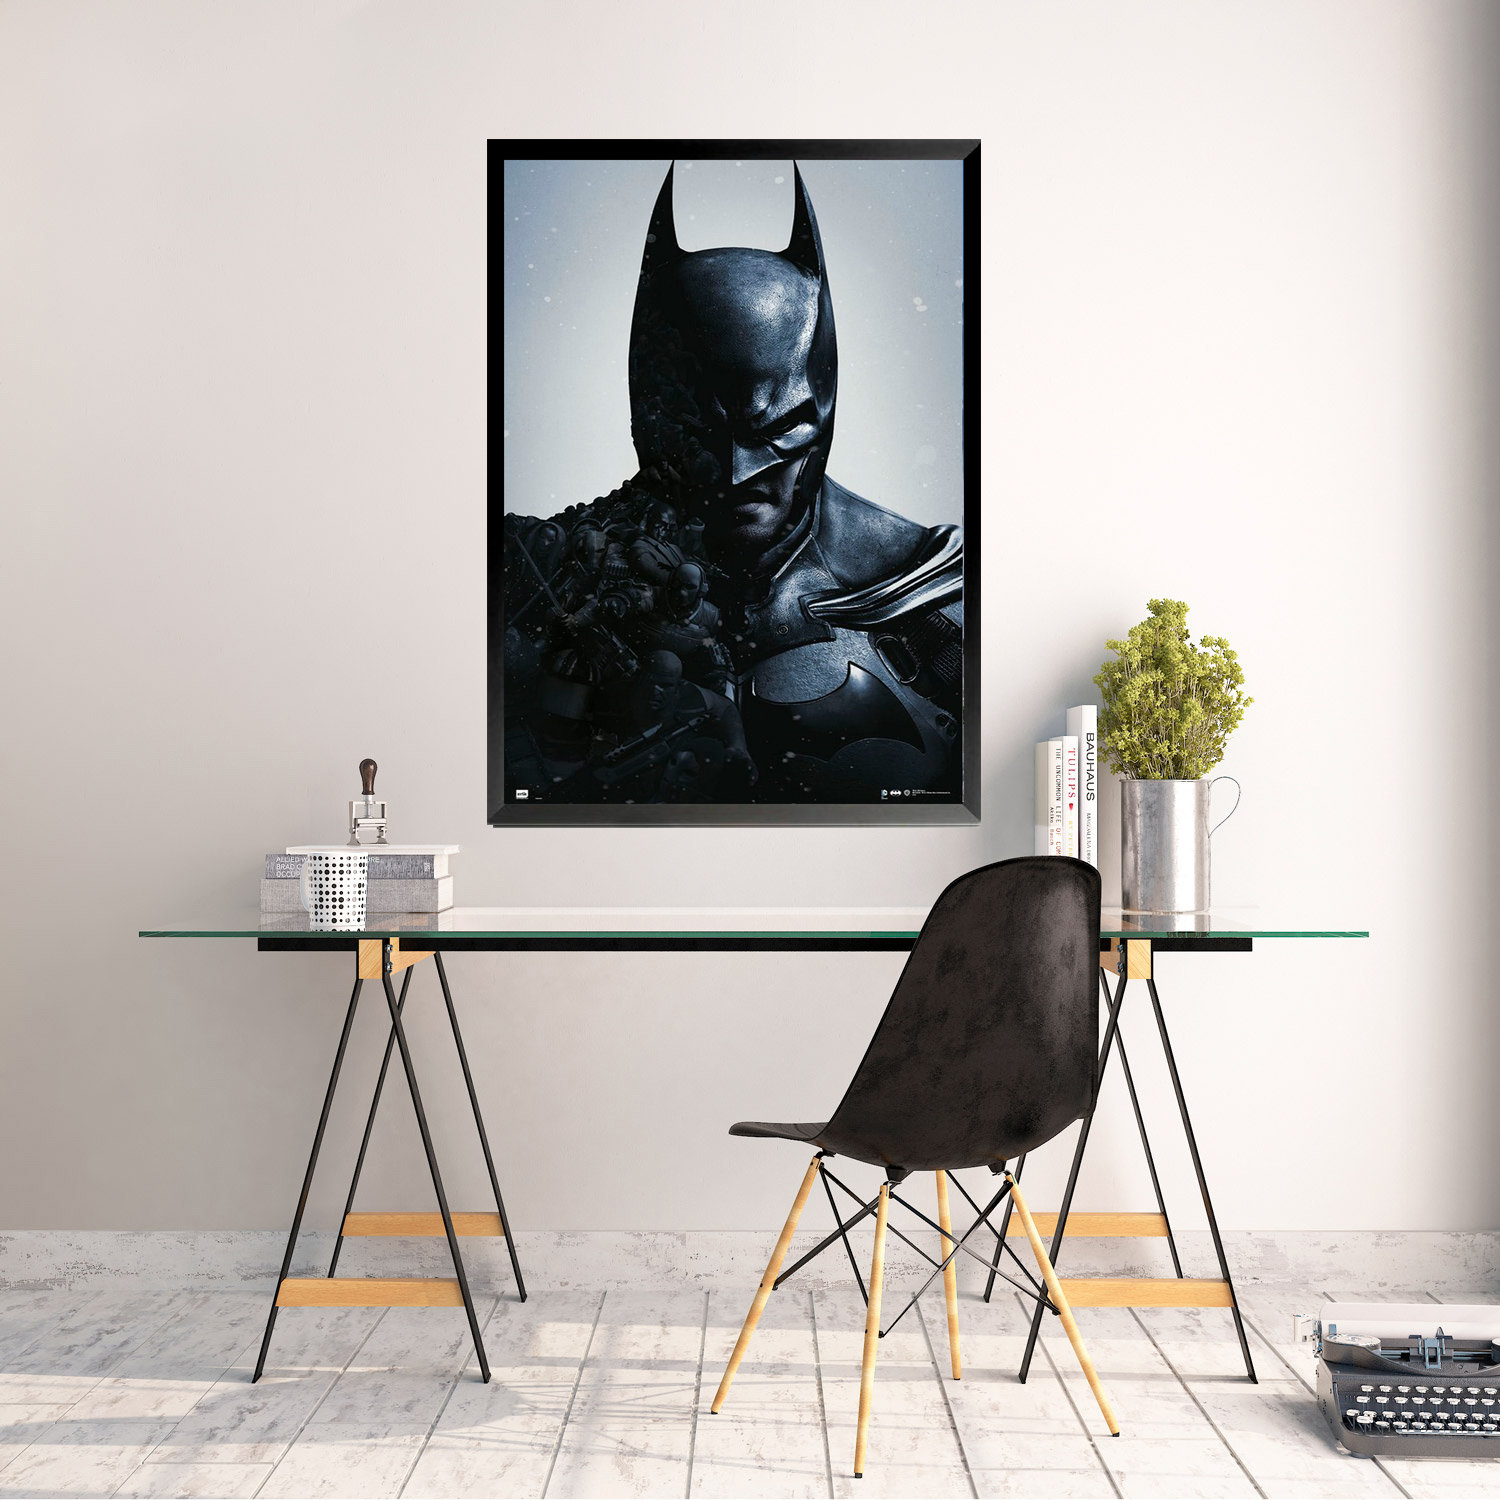 Buy Art For Less Picture Frame Graphic Art on MDF | Wayfair